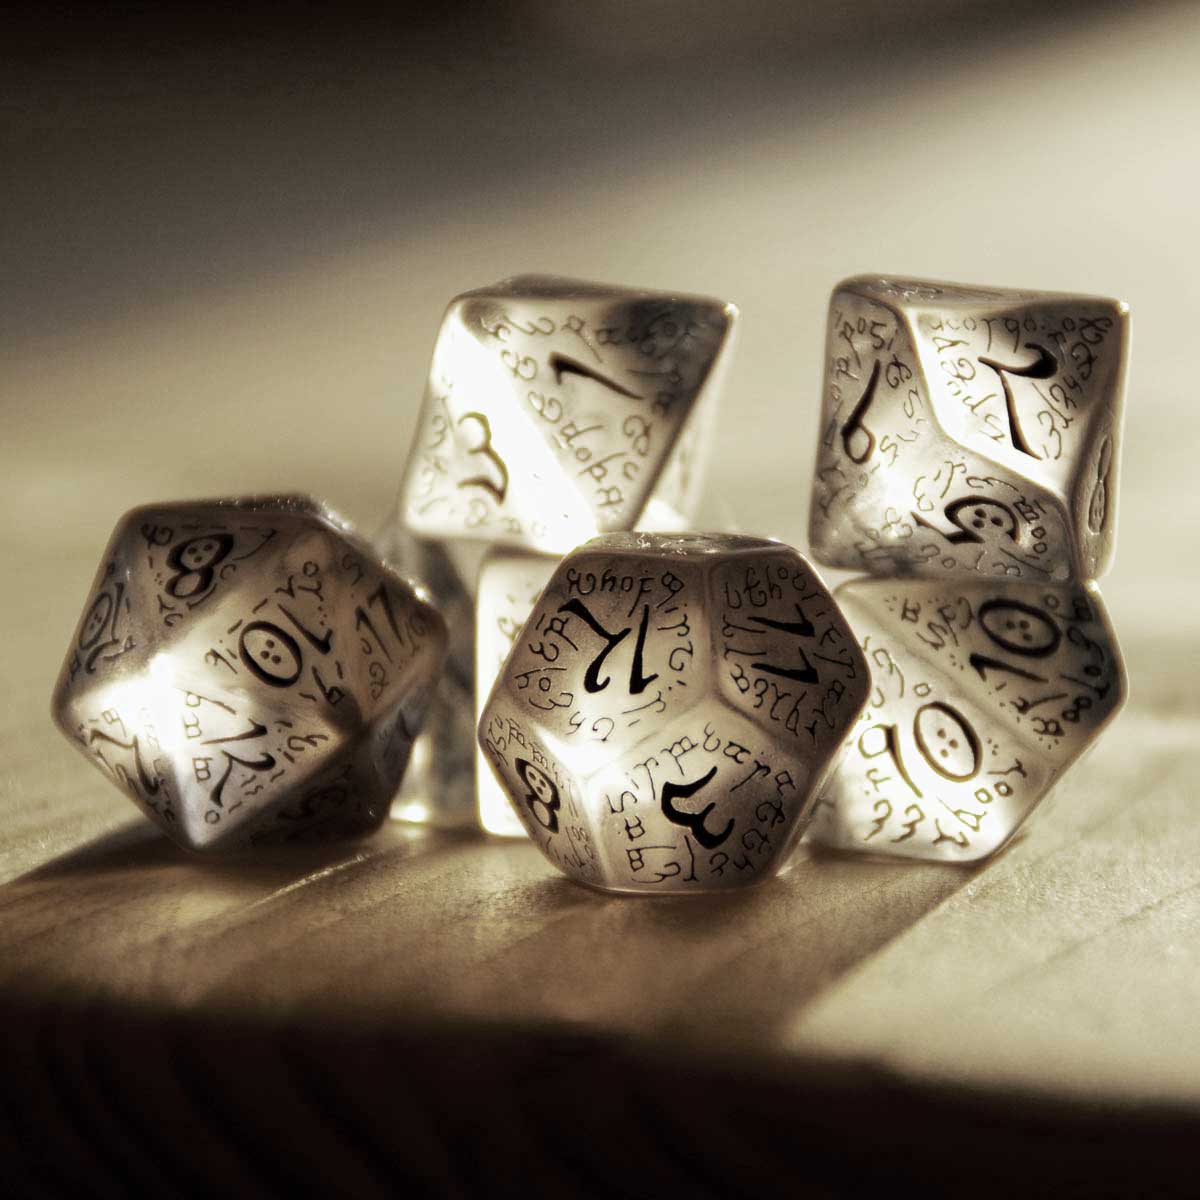 Game dice on a table.